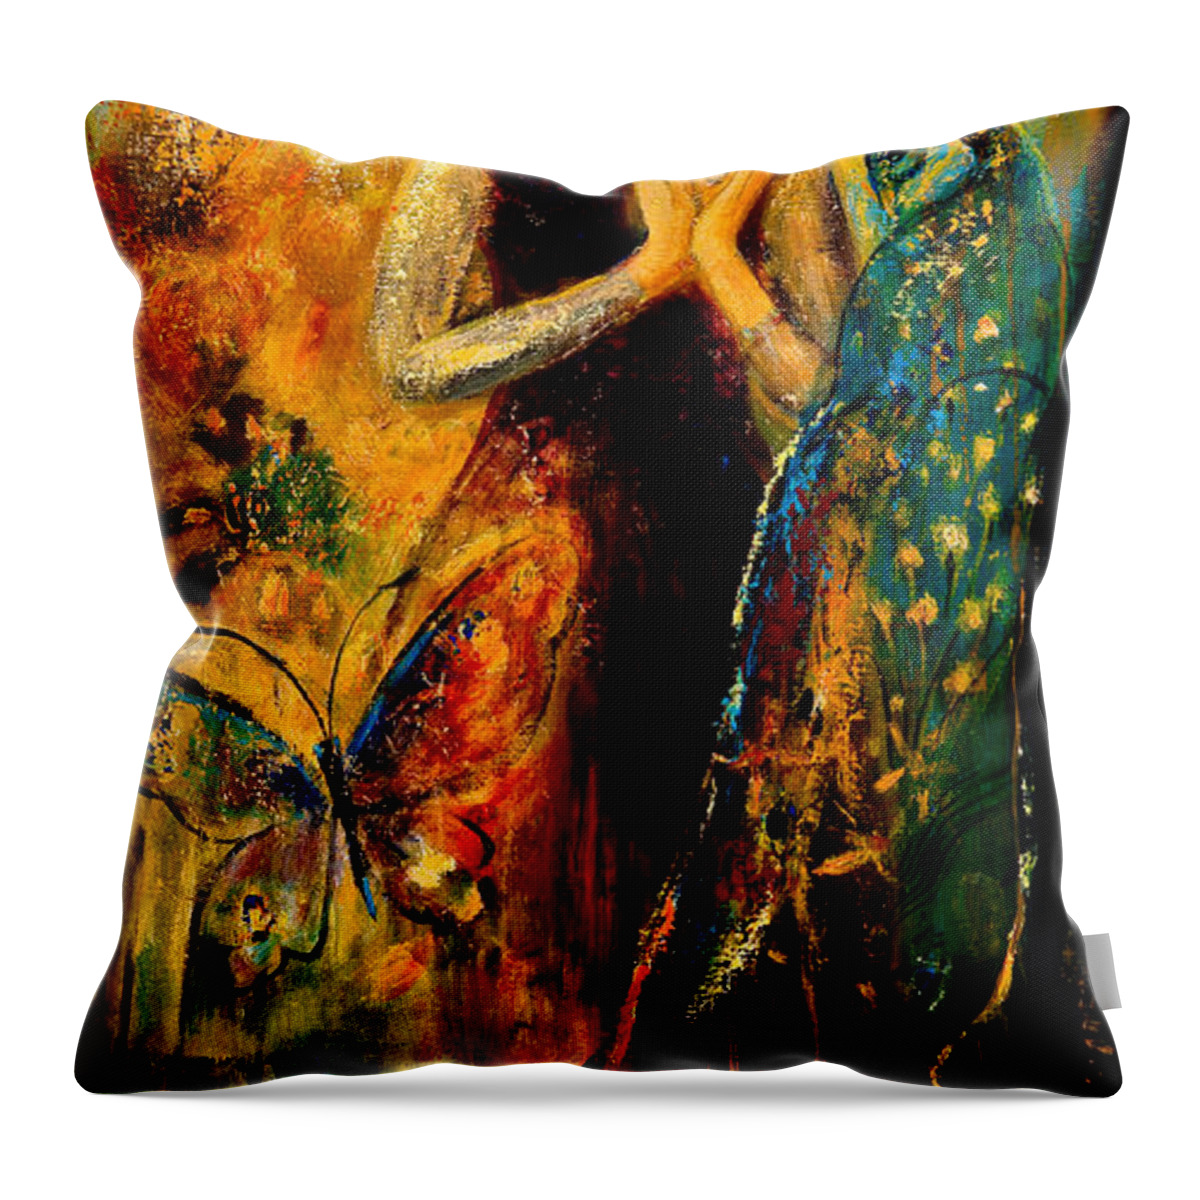 Faerie Throw Pillow featuring the painting Peace by Shijun Munns